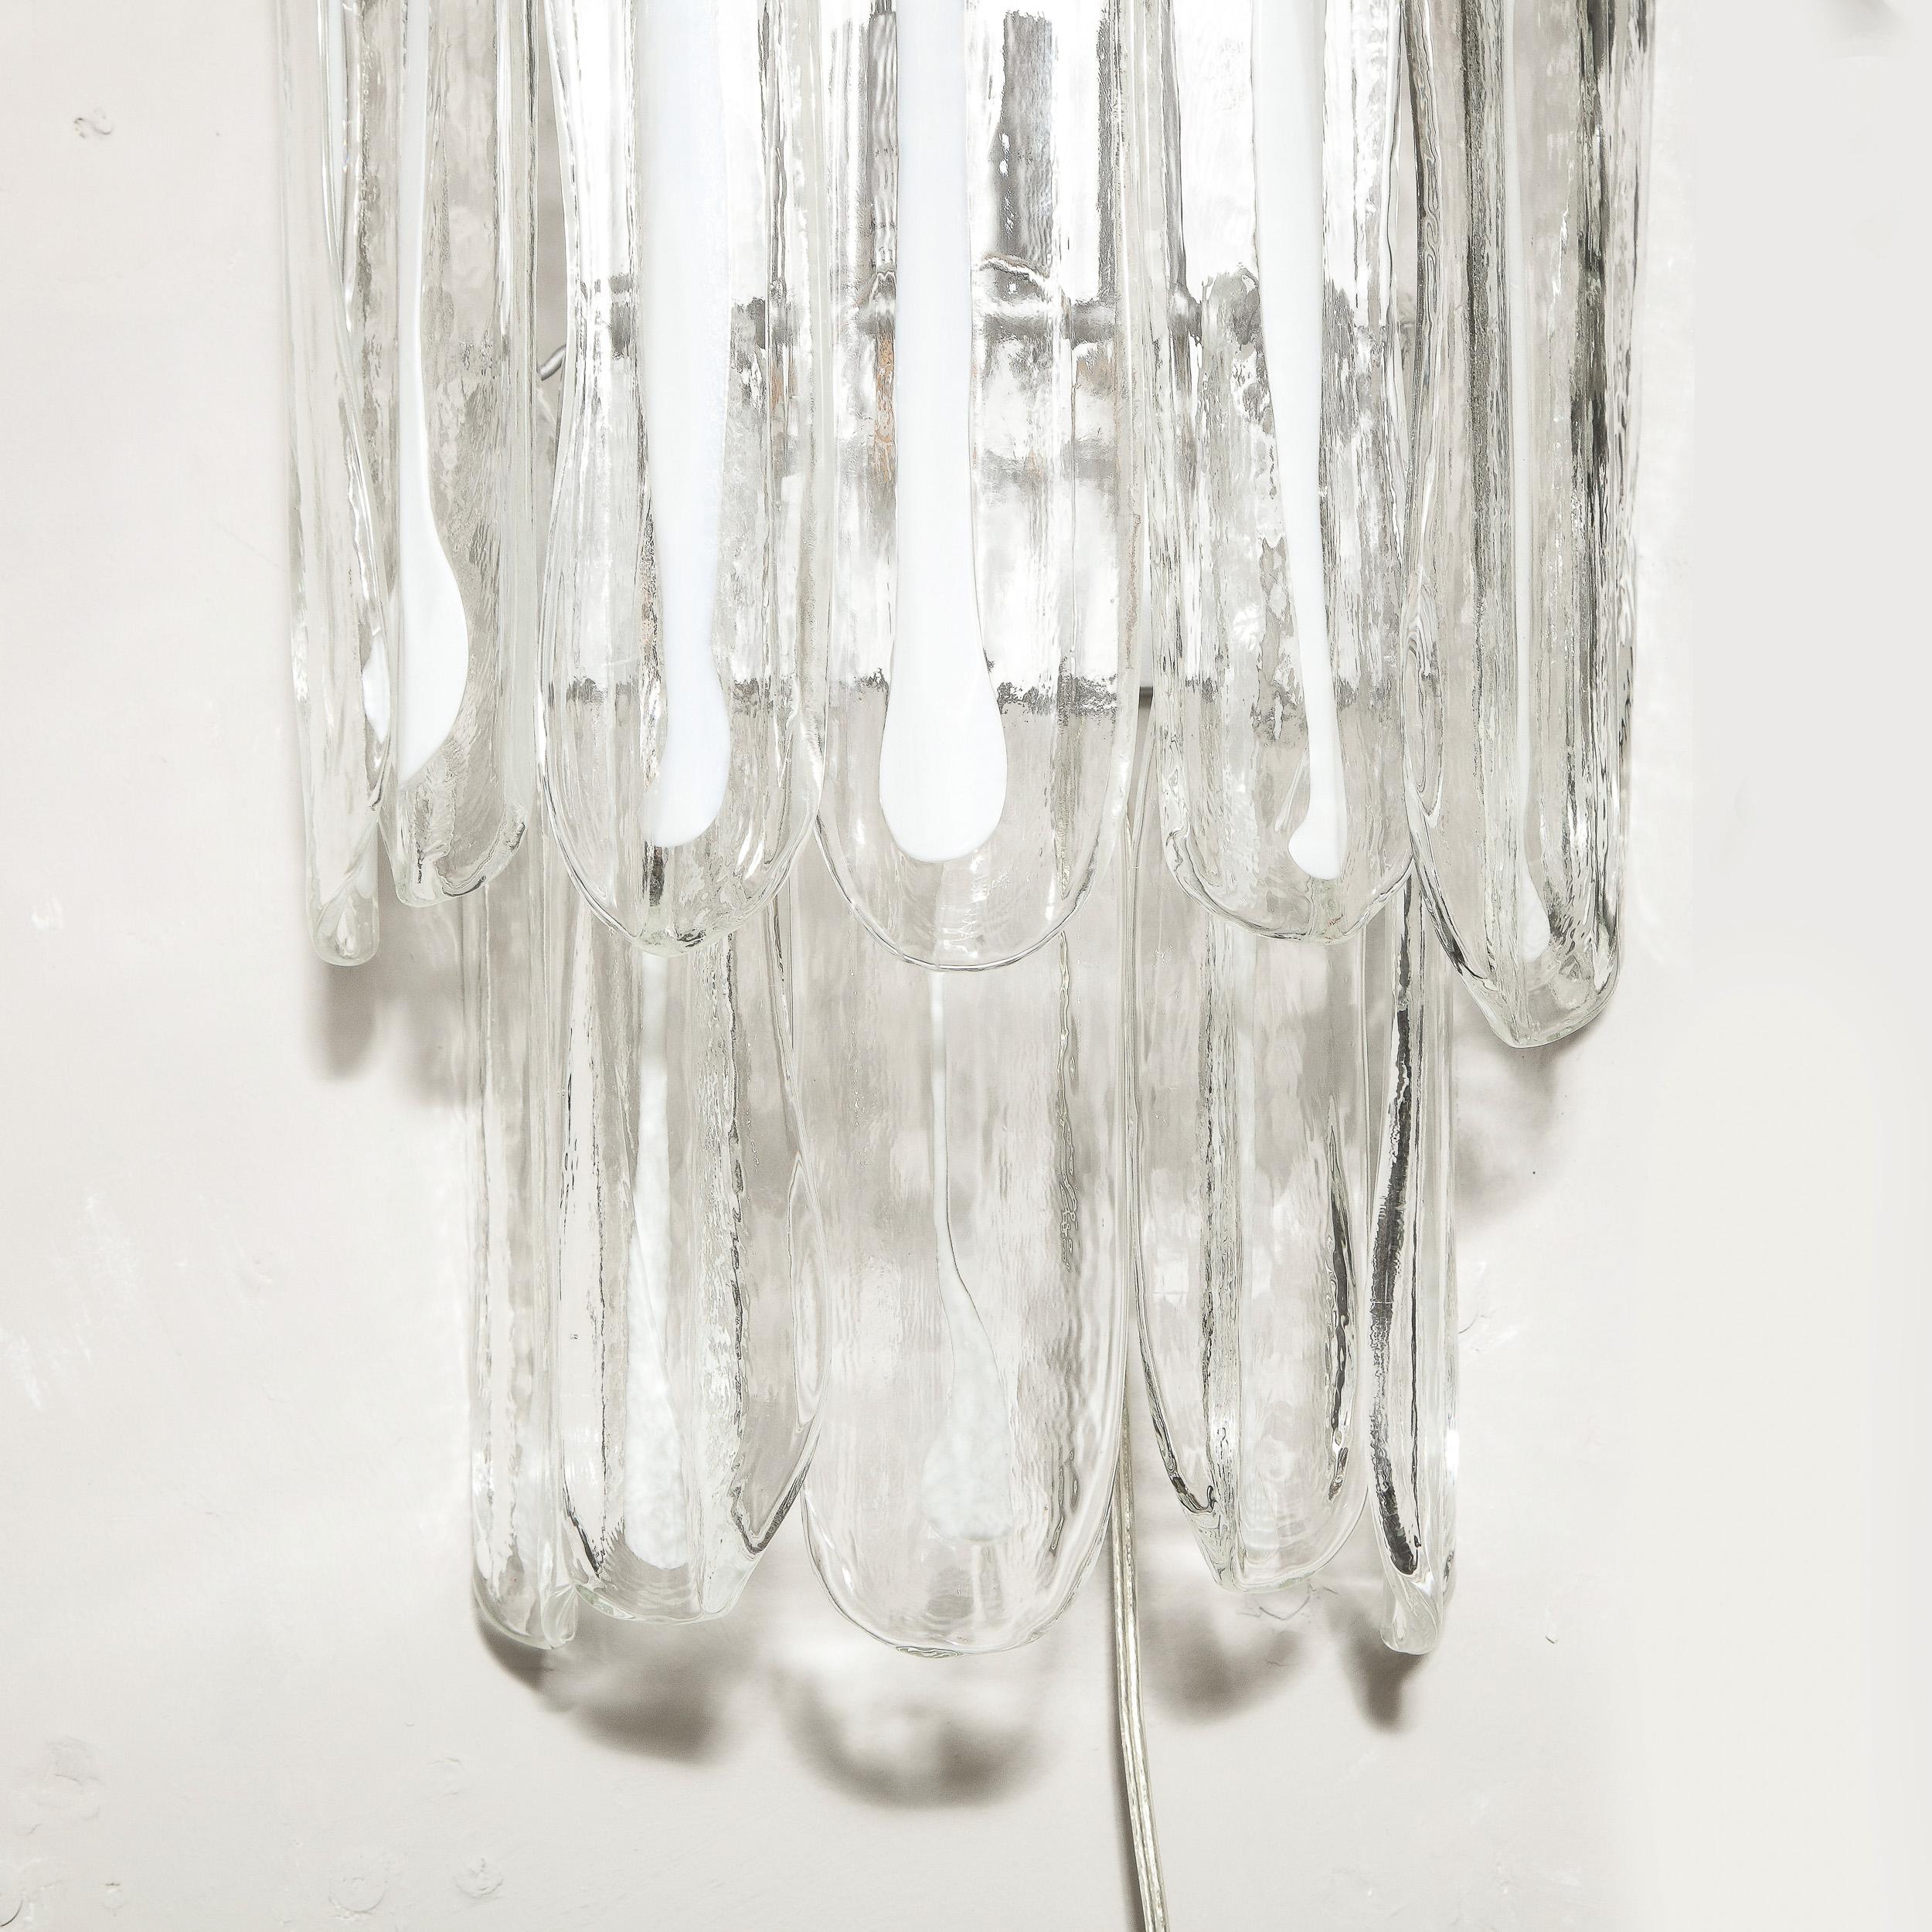 Pair of Mid-Century Modern Translucent & White Murano Glass Sconces by Mazzega For Sale 6